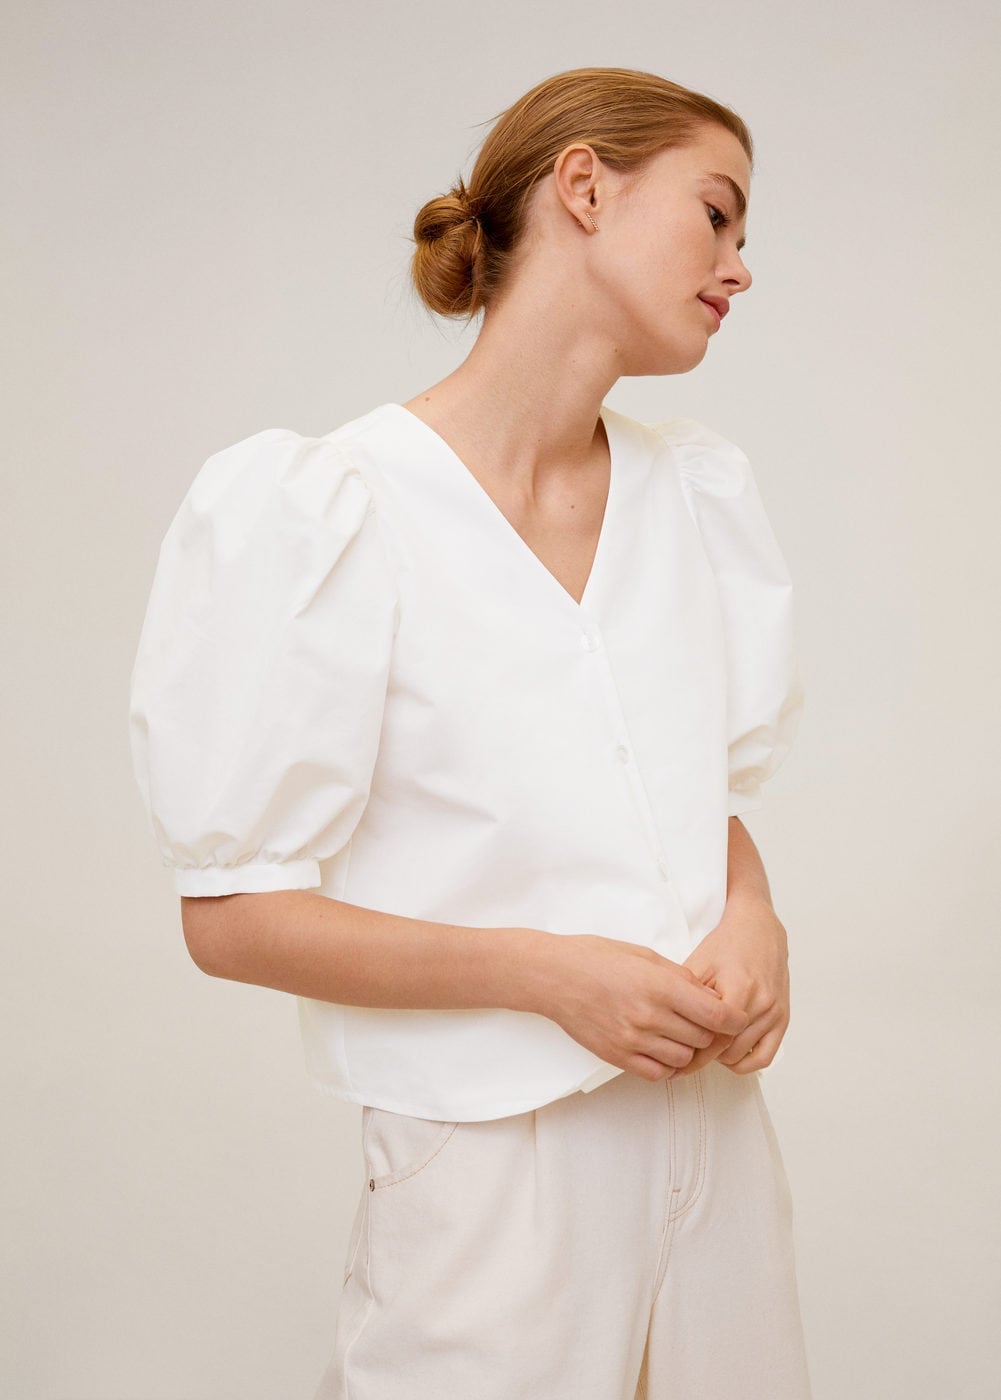 Productiviteit Justitie Per ongeluk Mango Puffed Sleeves Cotton Blouse | 5 Huge Spring Trends You Can Shop for  $50 or Less | POPSUGAR Fashion Photo 3